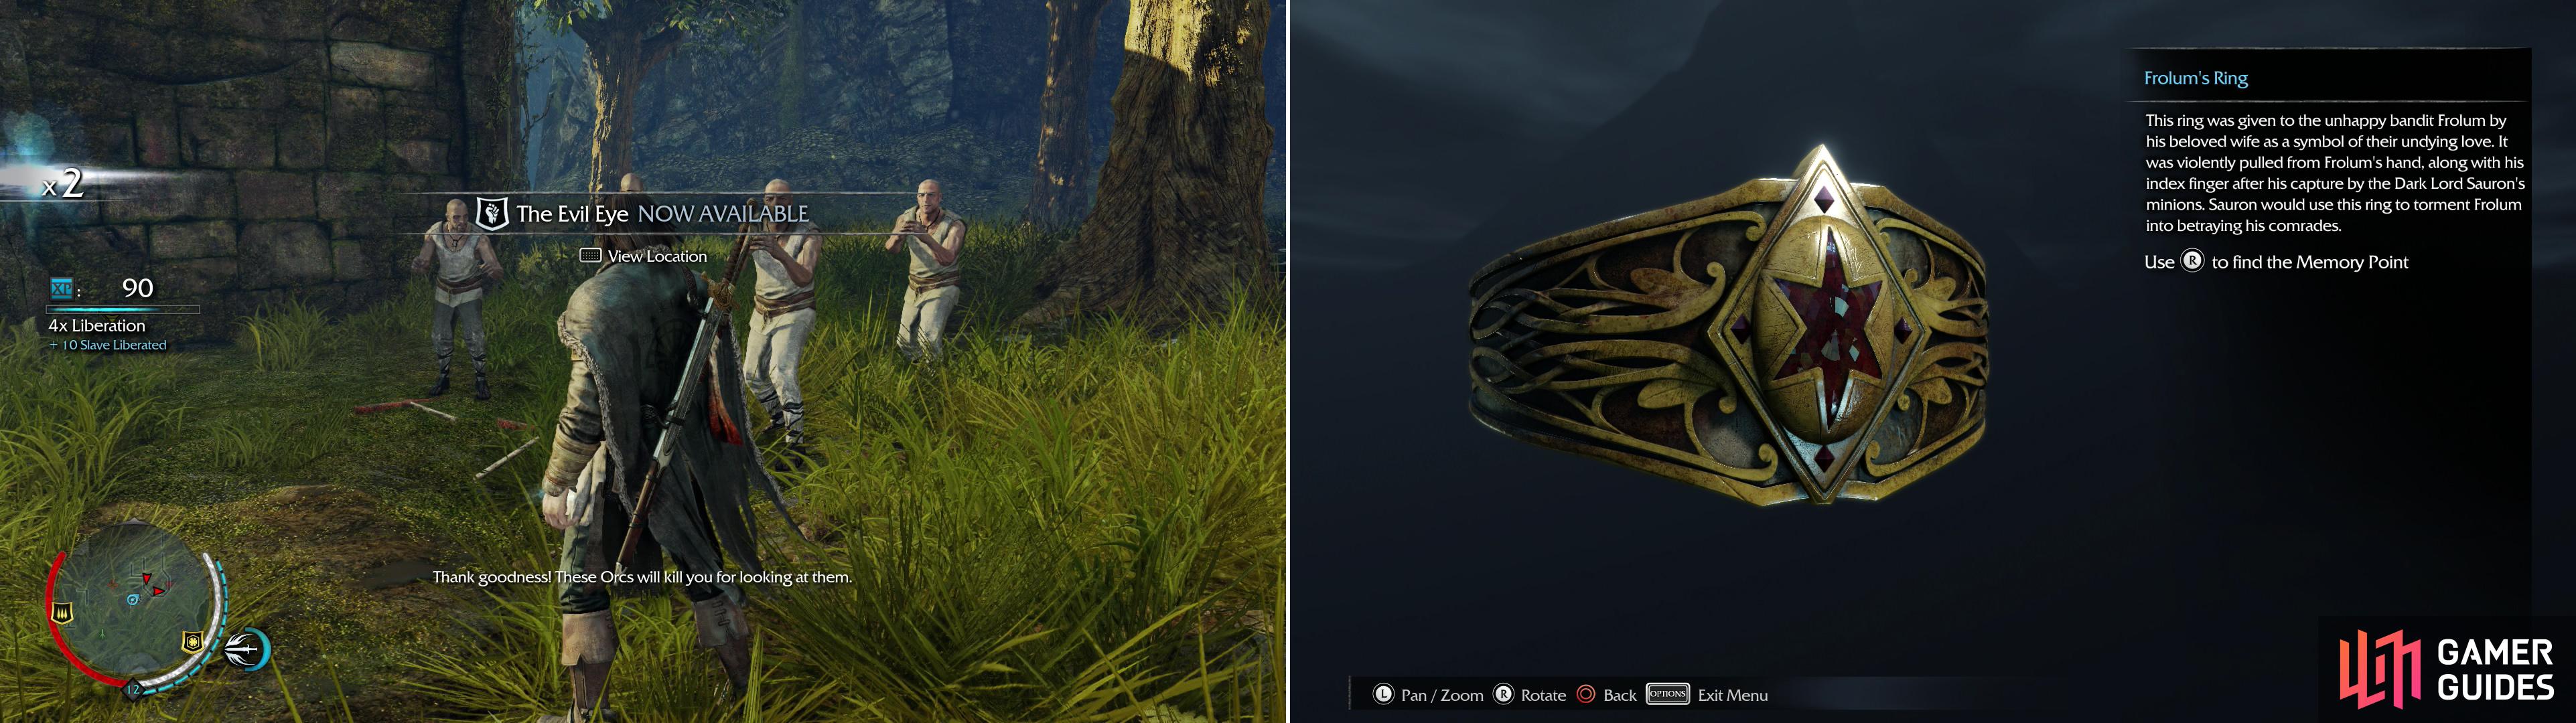 Men in Nurn are as oppressed by the Uruks as the ones in Udun (left). Pick up the Frolum's Ring artifact to finish up the Harad Basin (right).